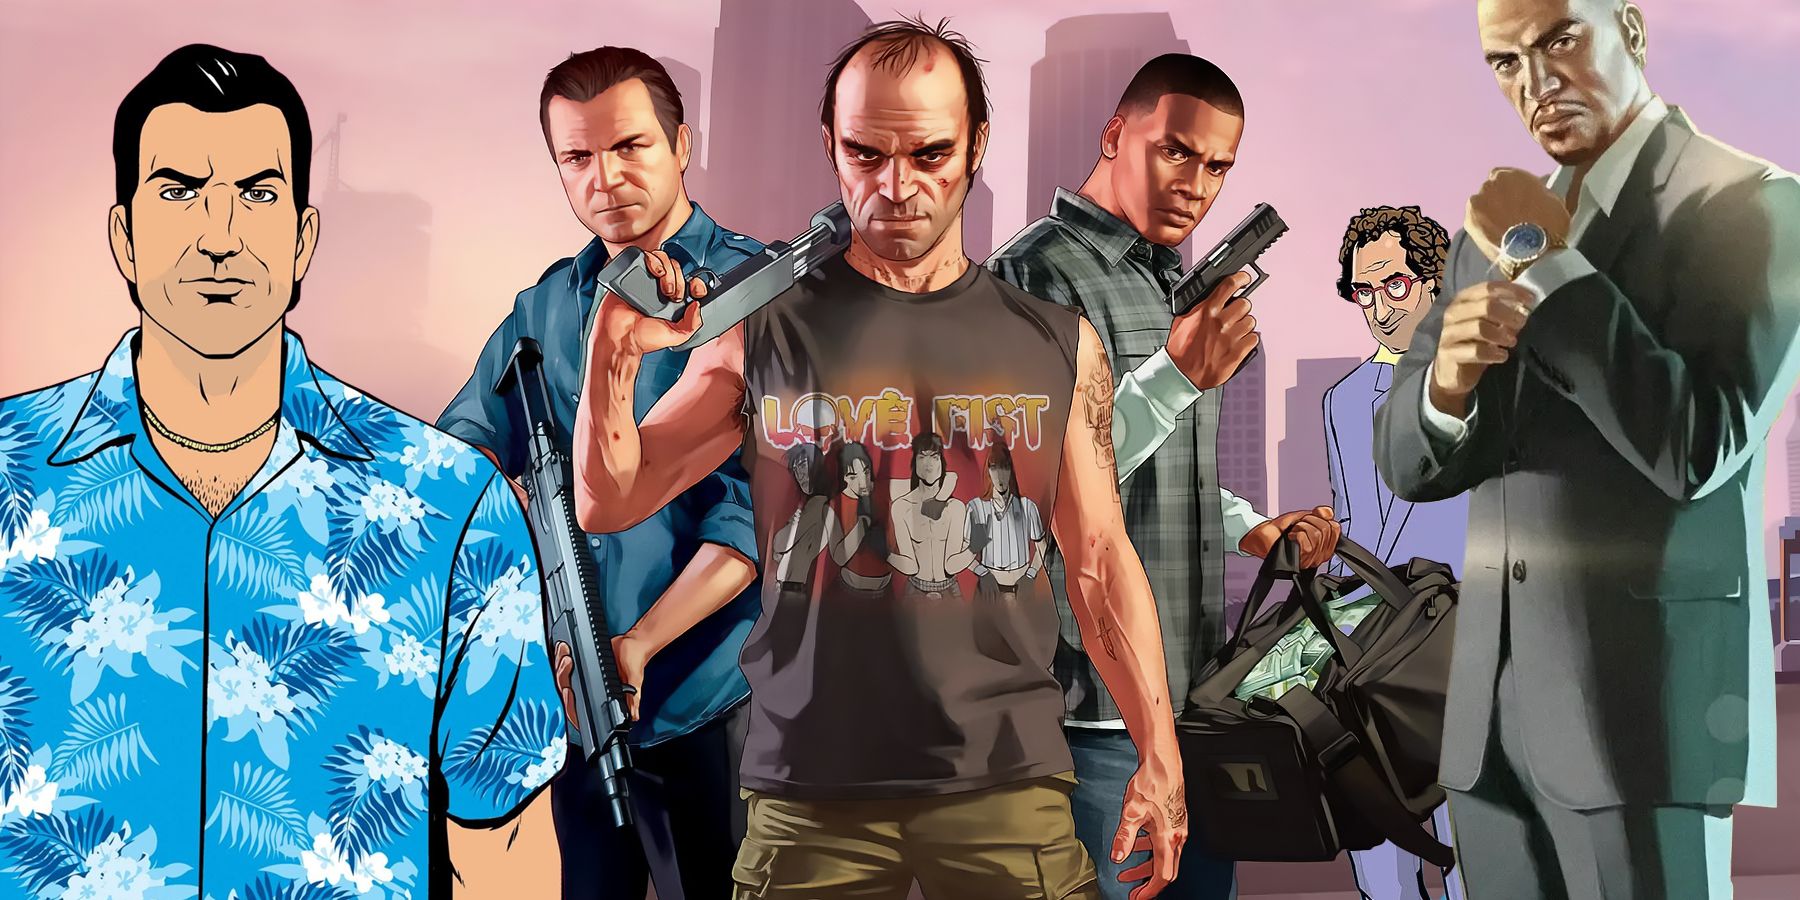 Grand-Theft-Auto-Ages-Of-The-Main-Characters-In-The-Games